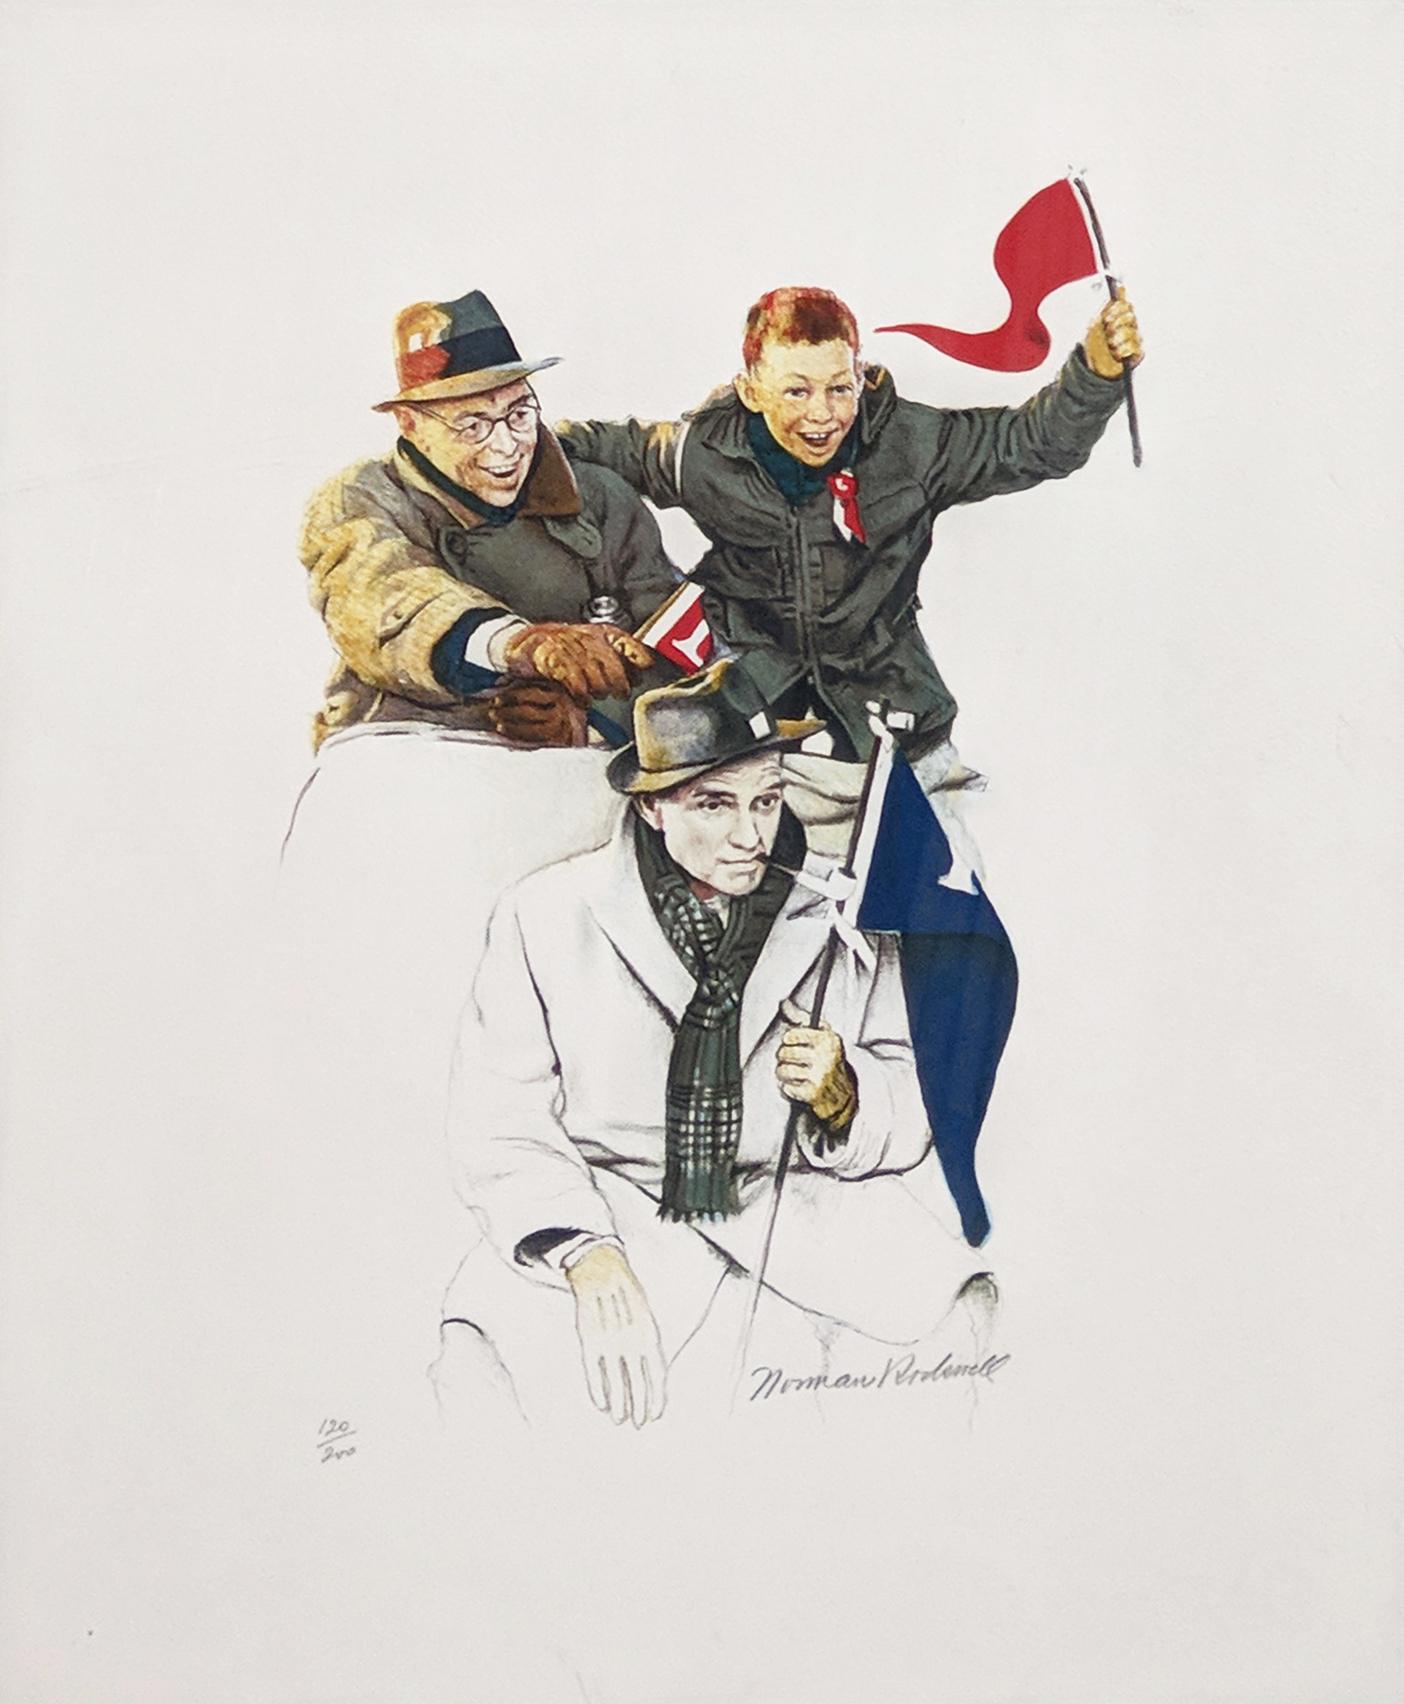 CHEERING - Print by Norman Rockwell